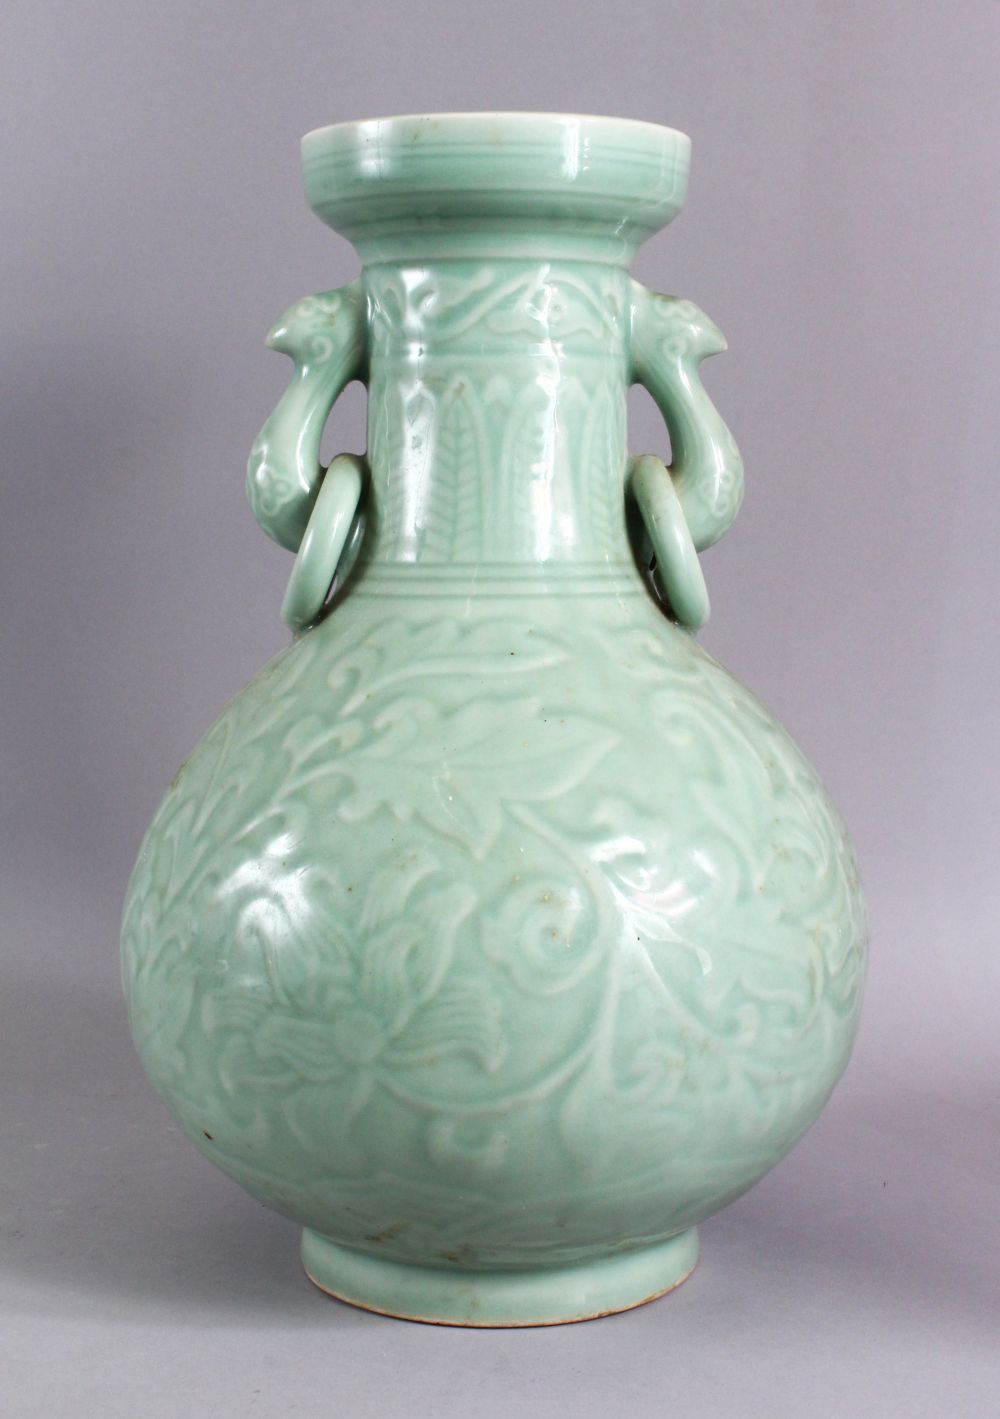 A LARGE CHINESE CELADON PORCELAIN TWIN HANDLE VASE, the body with carved floral decoration beneath a